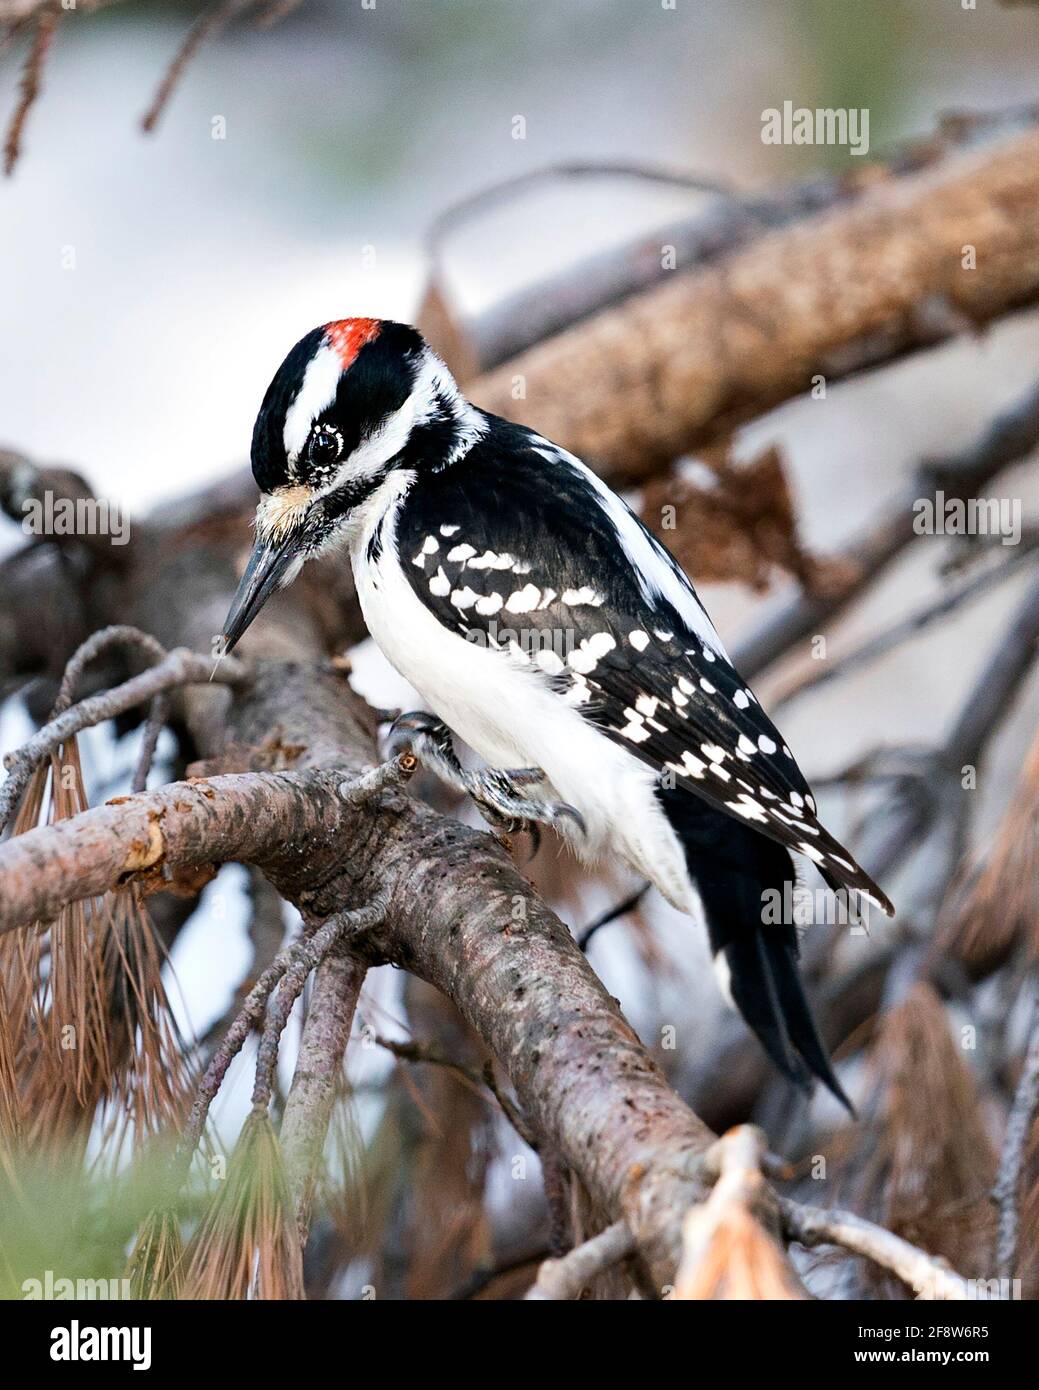 Woodpecker male close-up profile view perched on a tree branches with blur background in its environment and habitat. Image. Picture. Portrait. Stock Photo